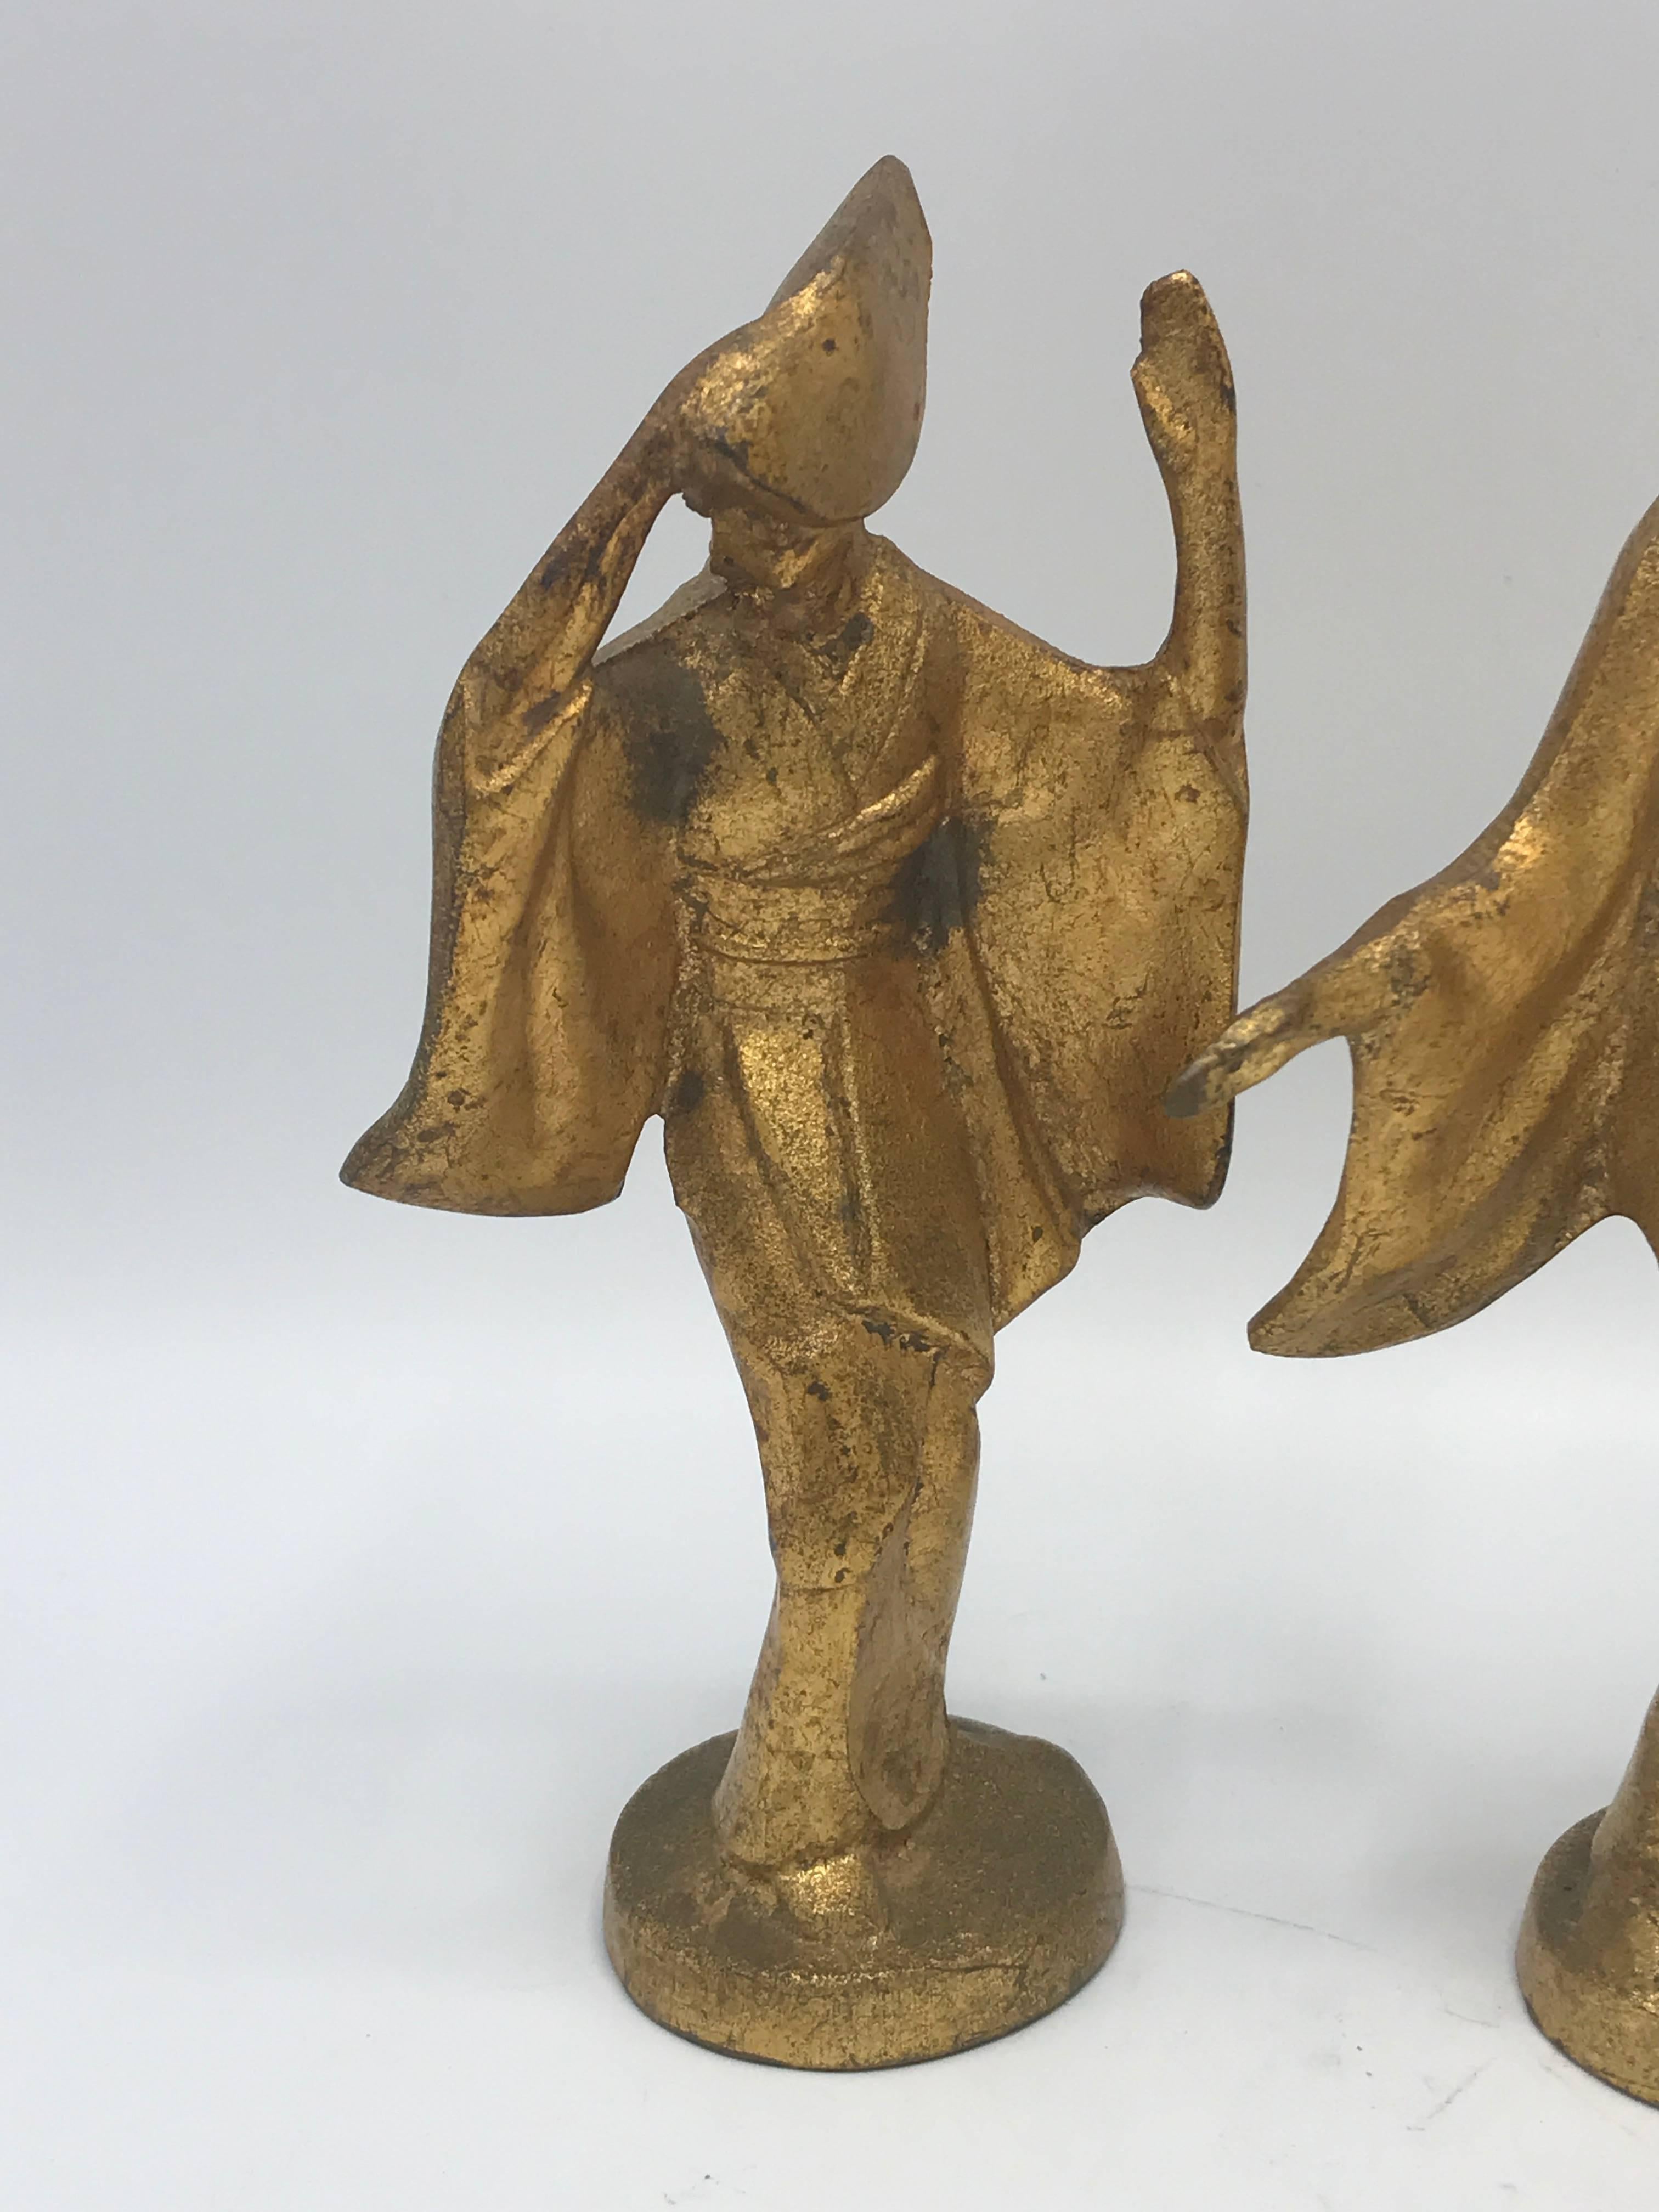 Offered is a gorgeous, set of three, 1950s Jame Mont style, gilded cast iron dancing geishas.